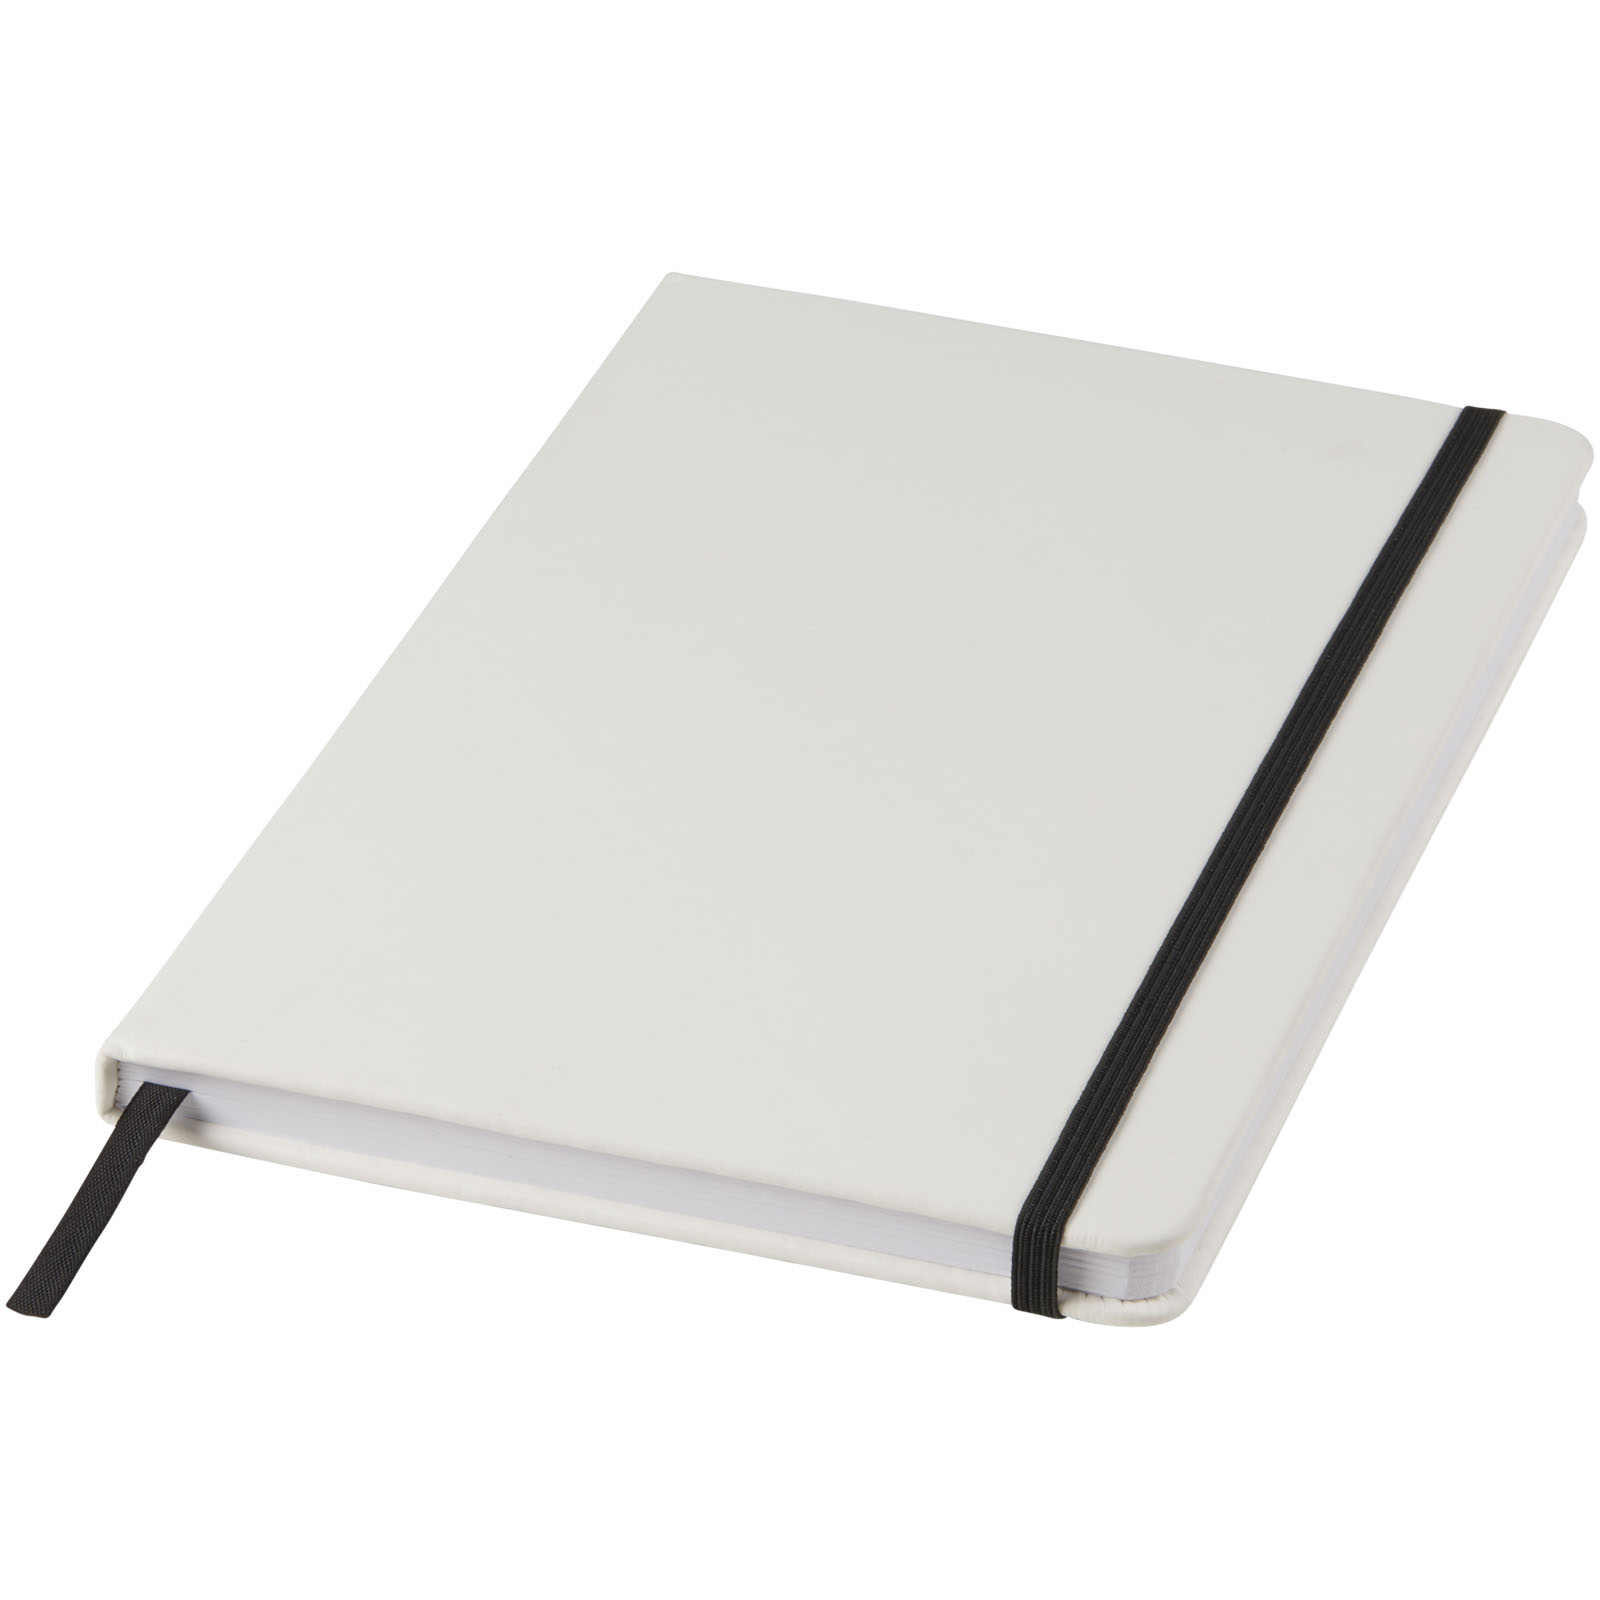 Advertising Hard cover notebooks - Spectrum A5 white notebook with coloured strap